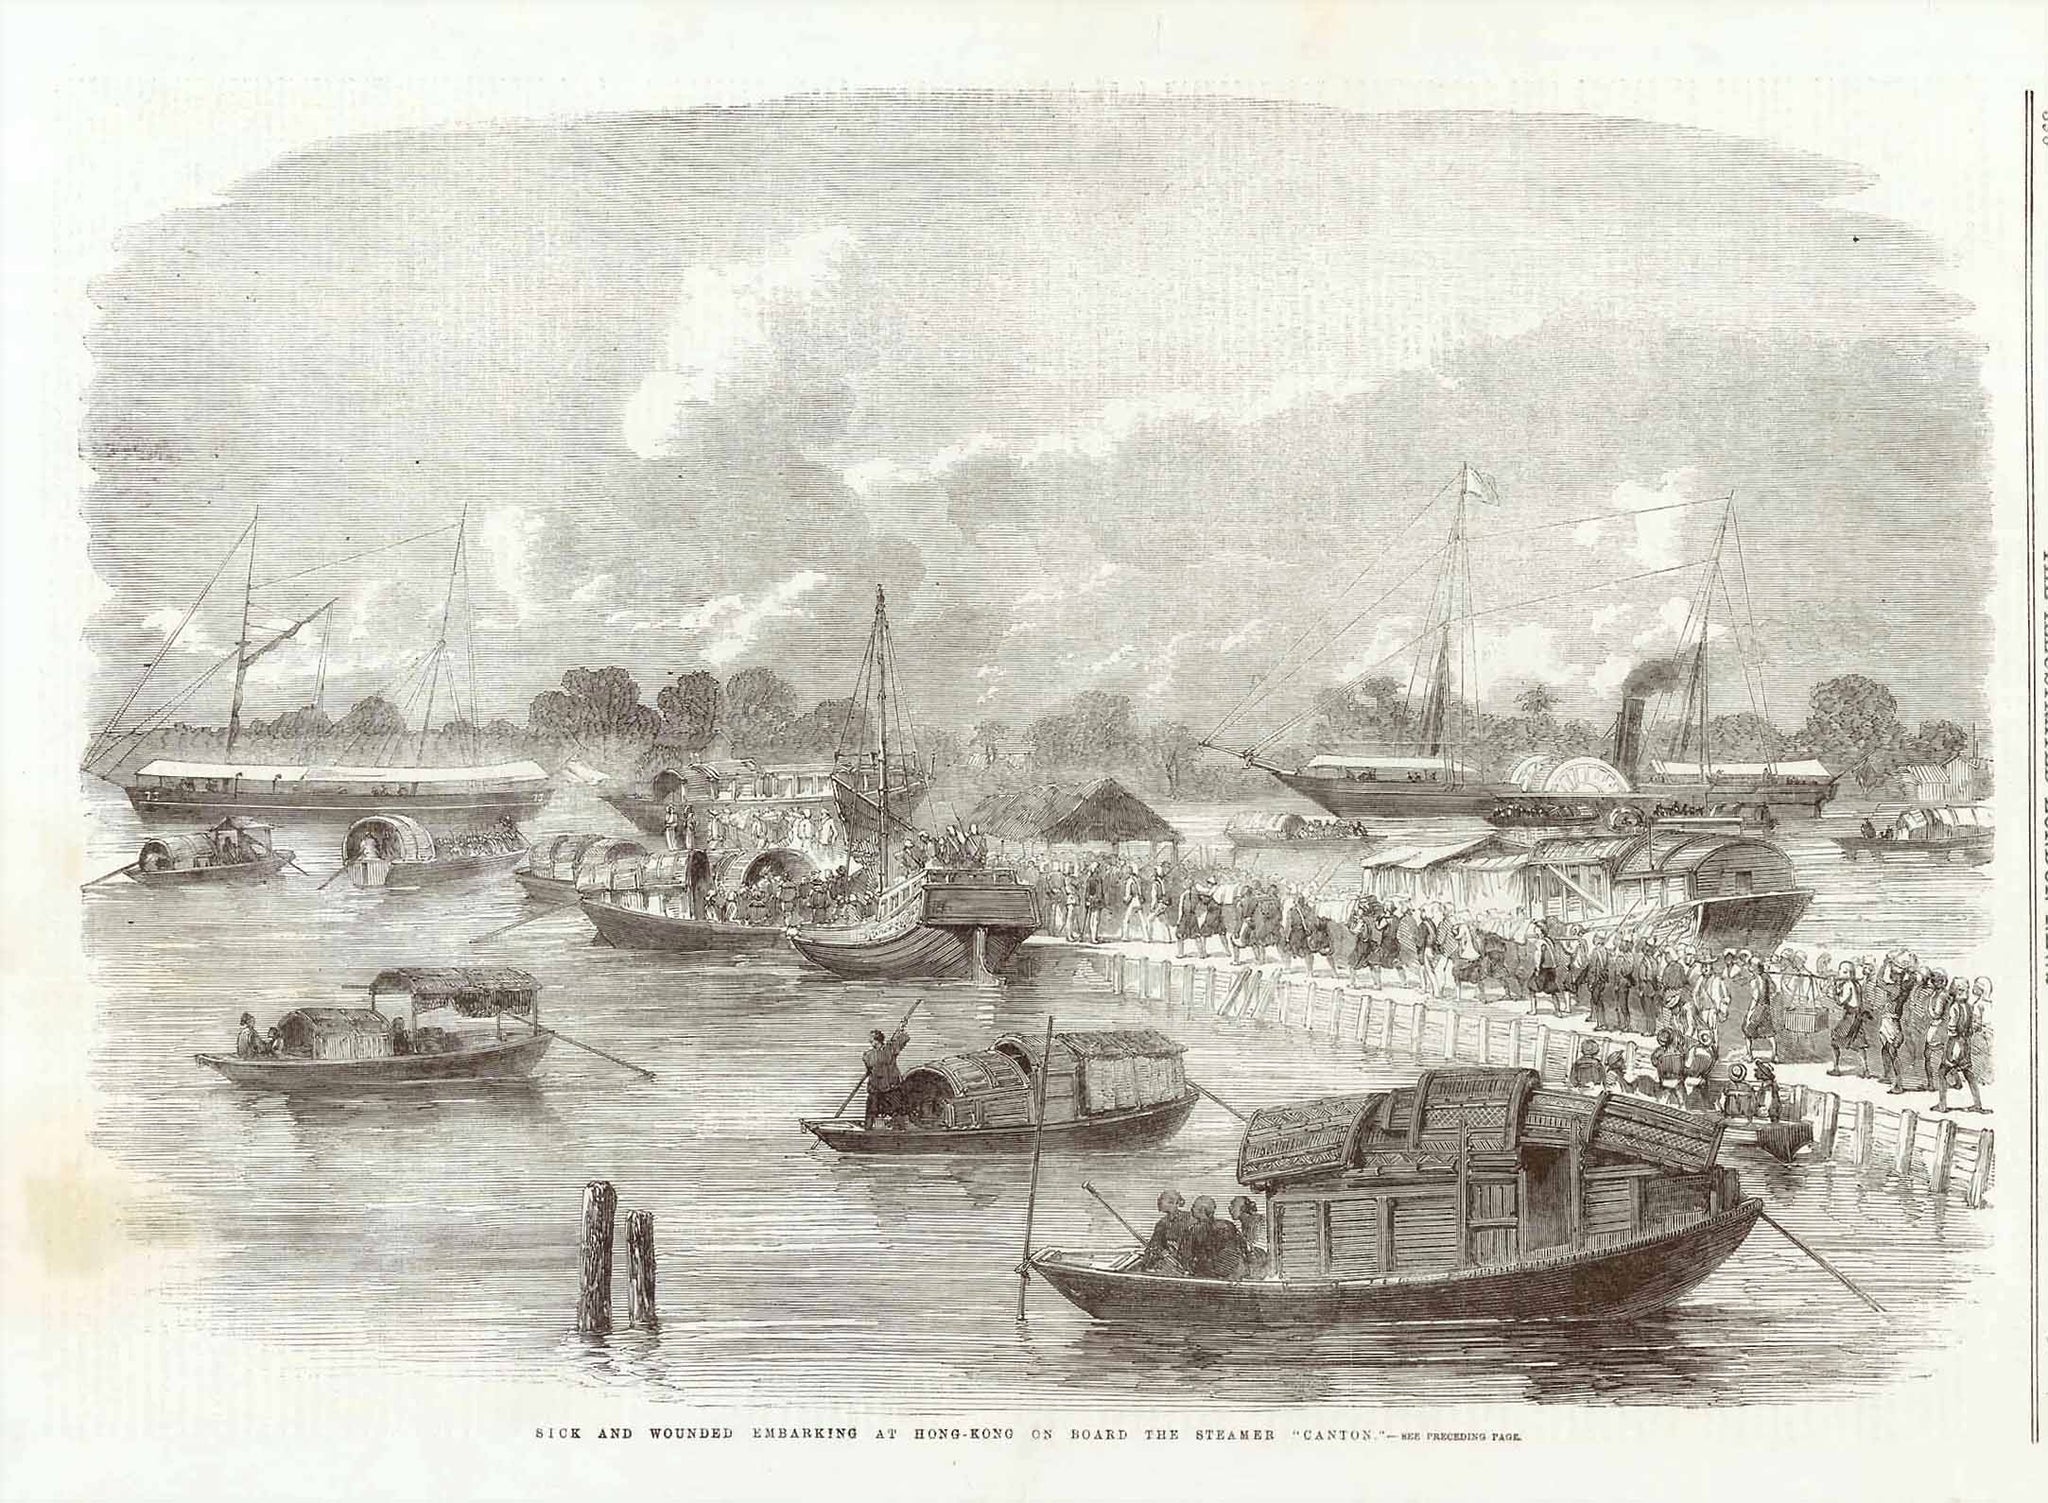 "Sick and Wounded Embarking at Hong-Kong on Board the Steamer "Canton"  Wood engraving published 1858. This print shows the sick being carried by coolies to be but on large boats.  On the reverse side is interesting text about the foreigners in Hong Kong and other news.  Original antique print 